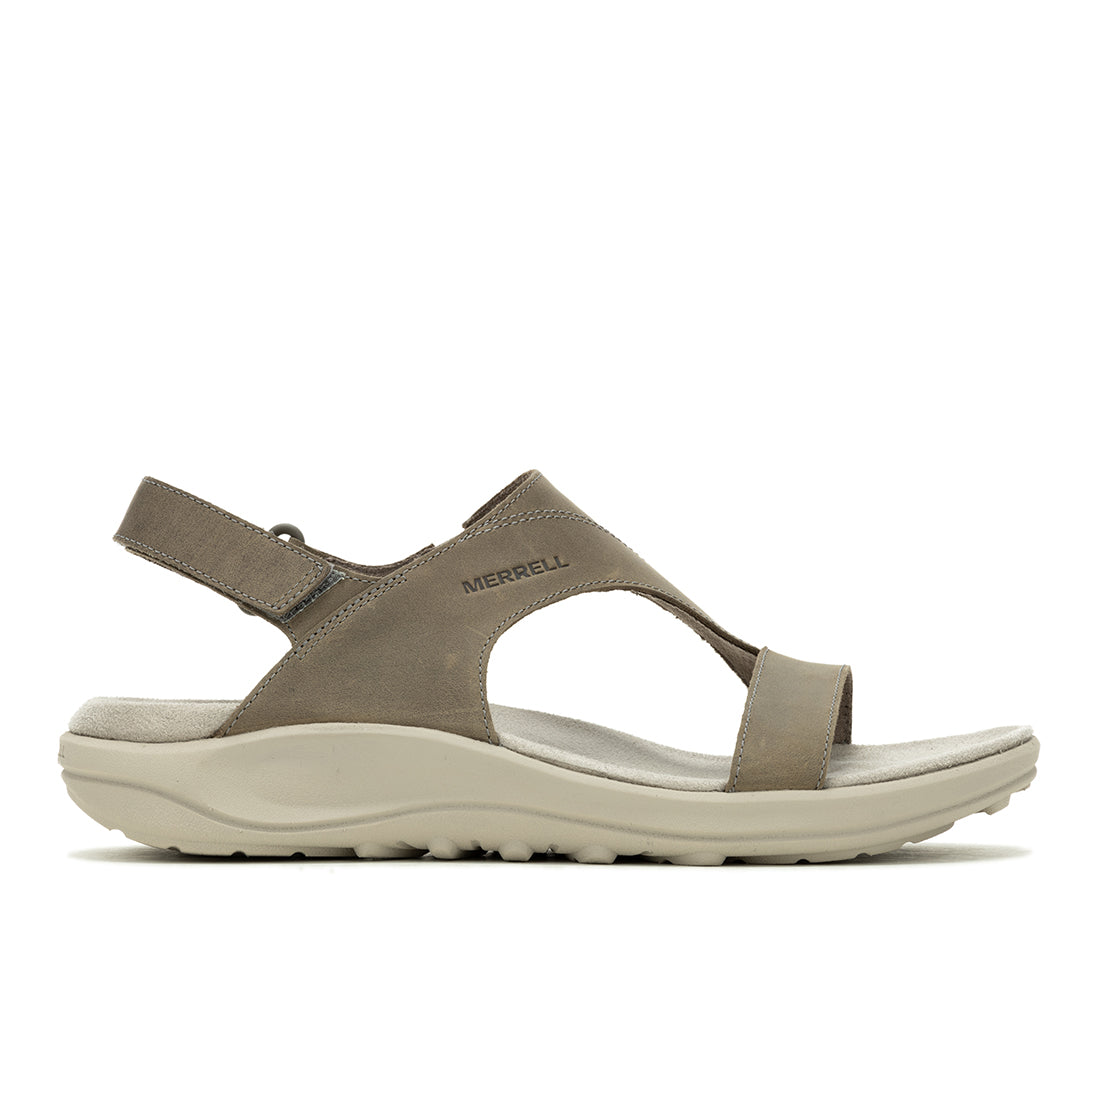 District 4 Luxe Backstrap – Brindle Womens Sandals Land